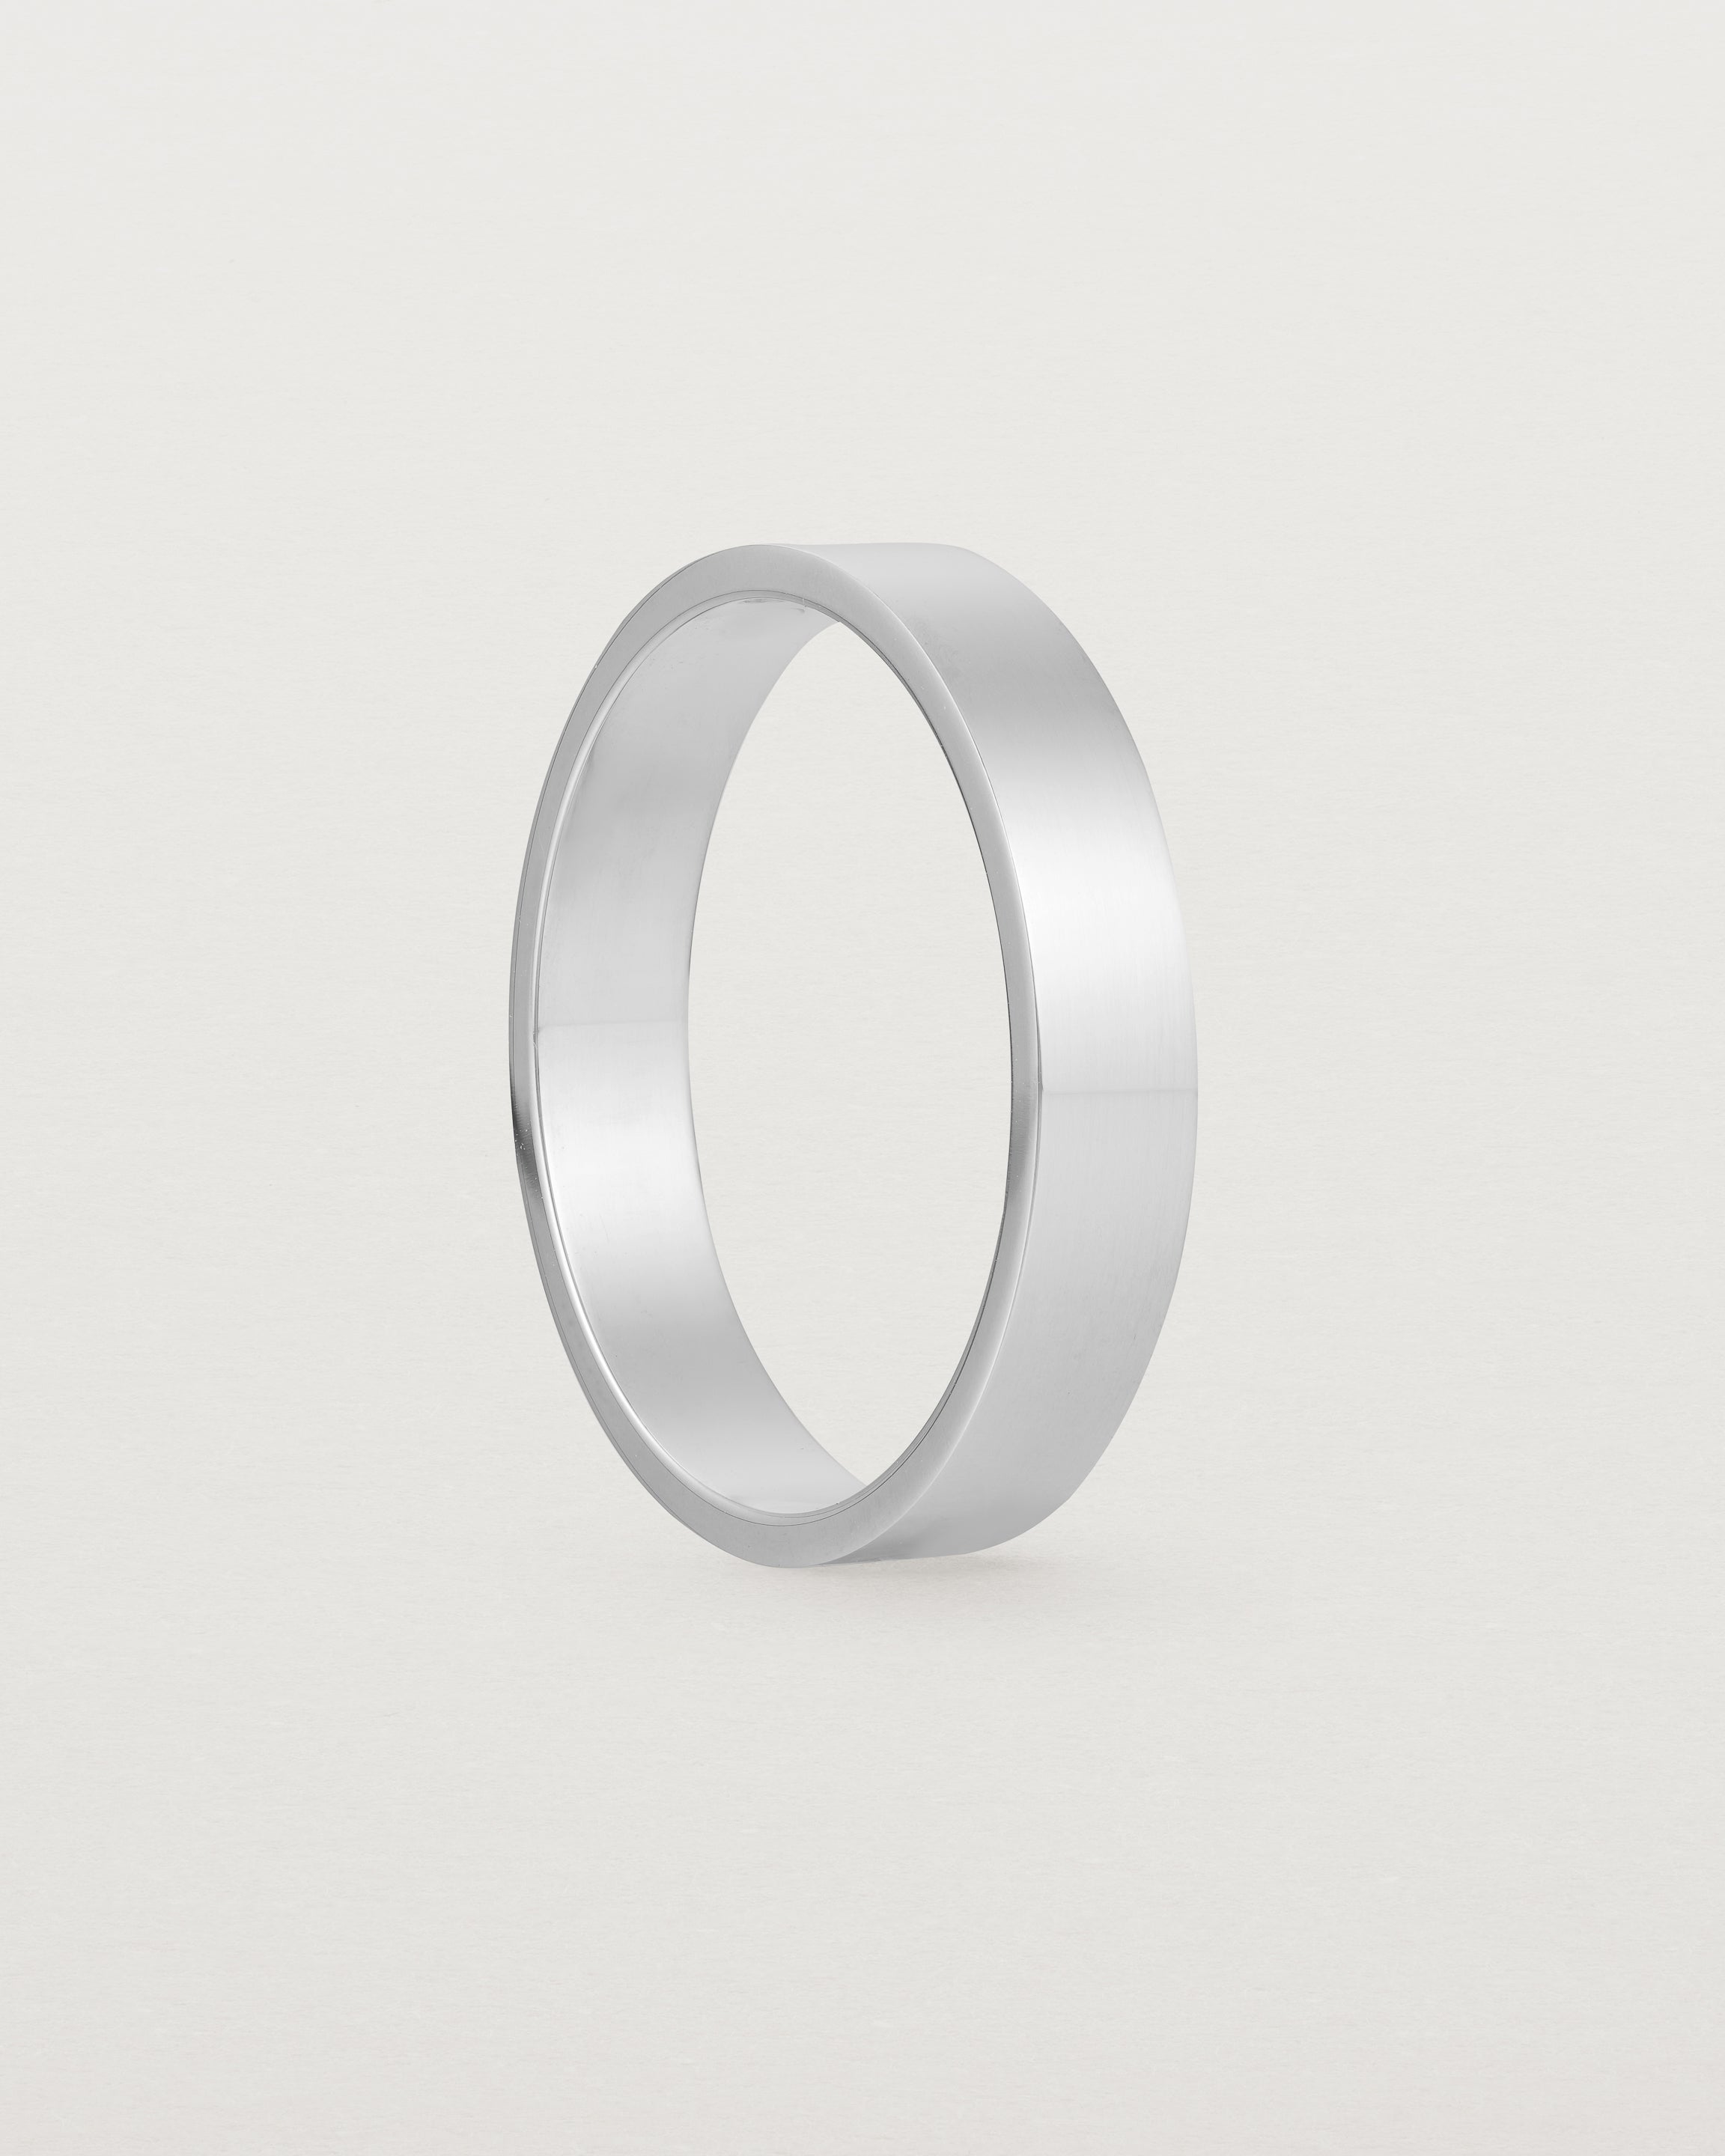 The side profile of our square, flat 4mm profile wedding band crafted in white gold